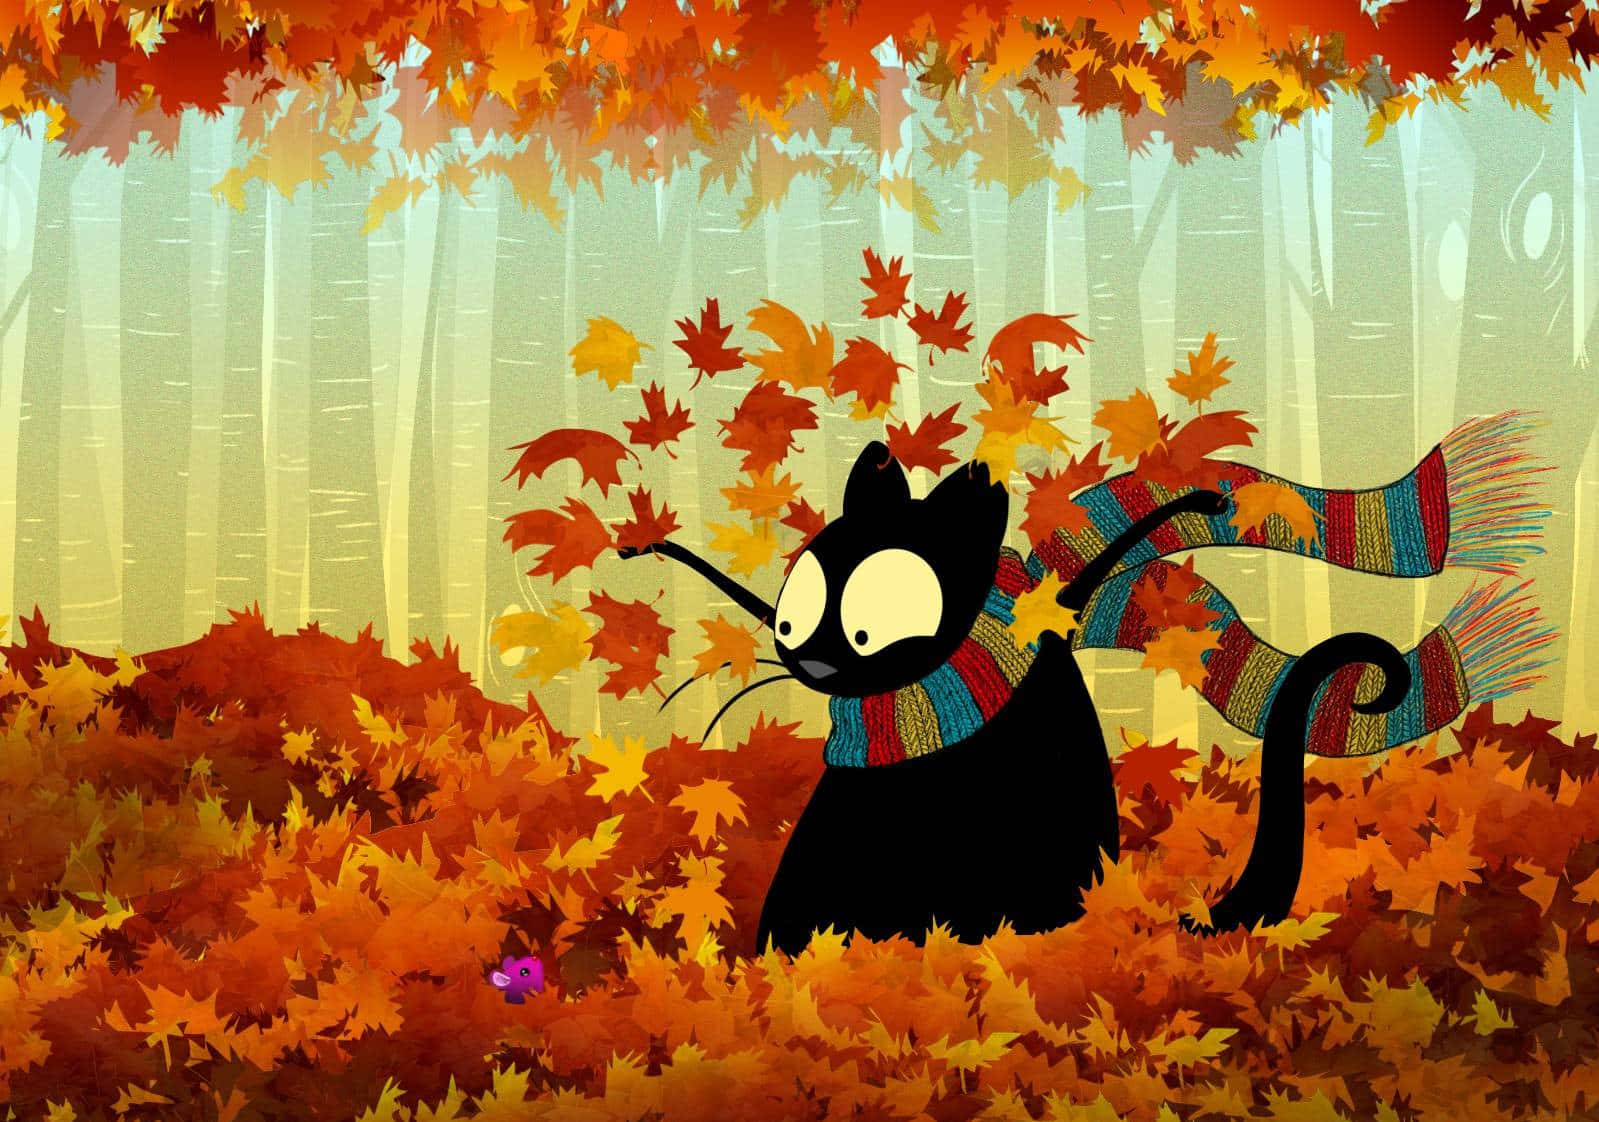 Enjoy fall in the magical world of Disney Wallpaper